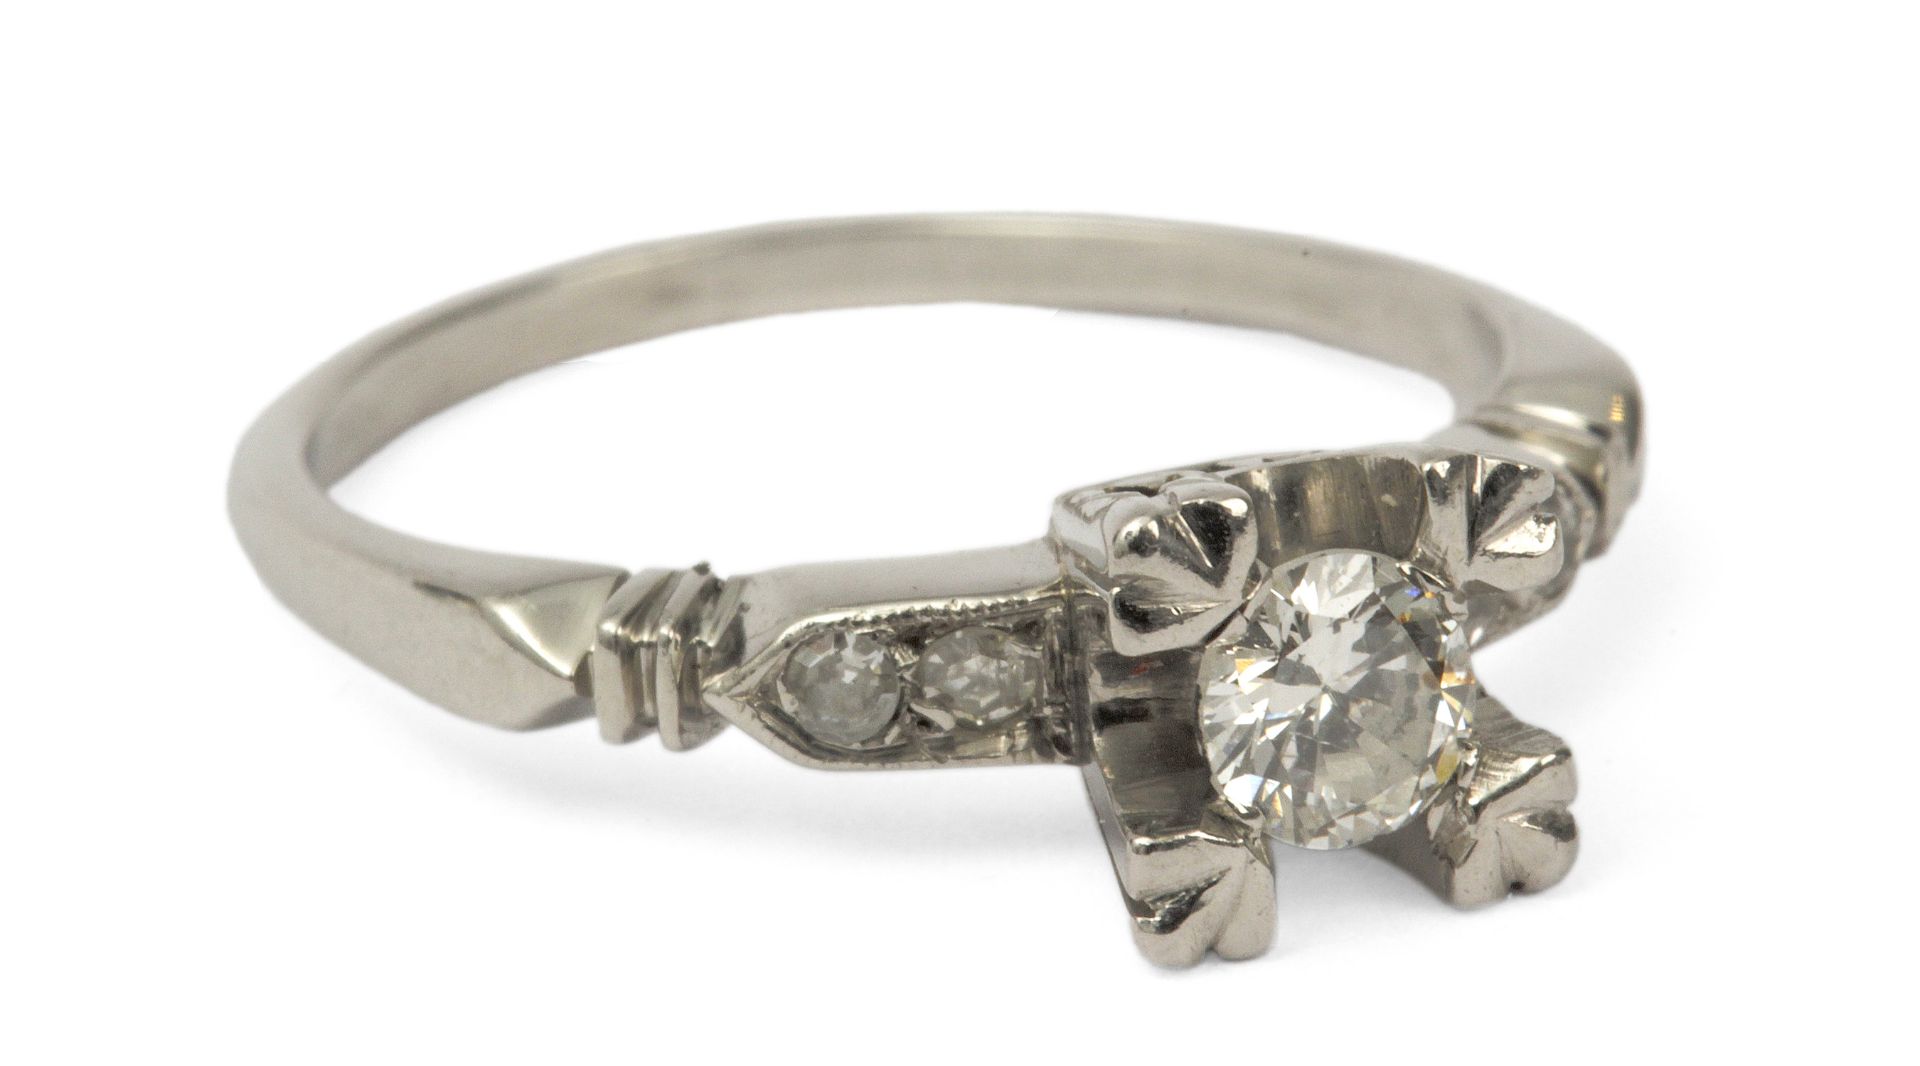 An engagement ring. 0,48 ct. brilliant cut diamond with a platinum setting